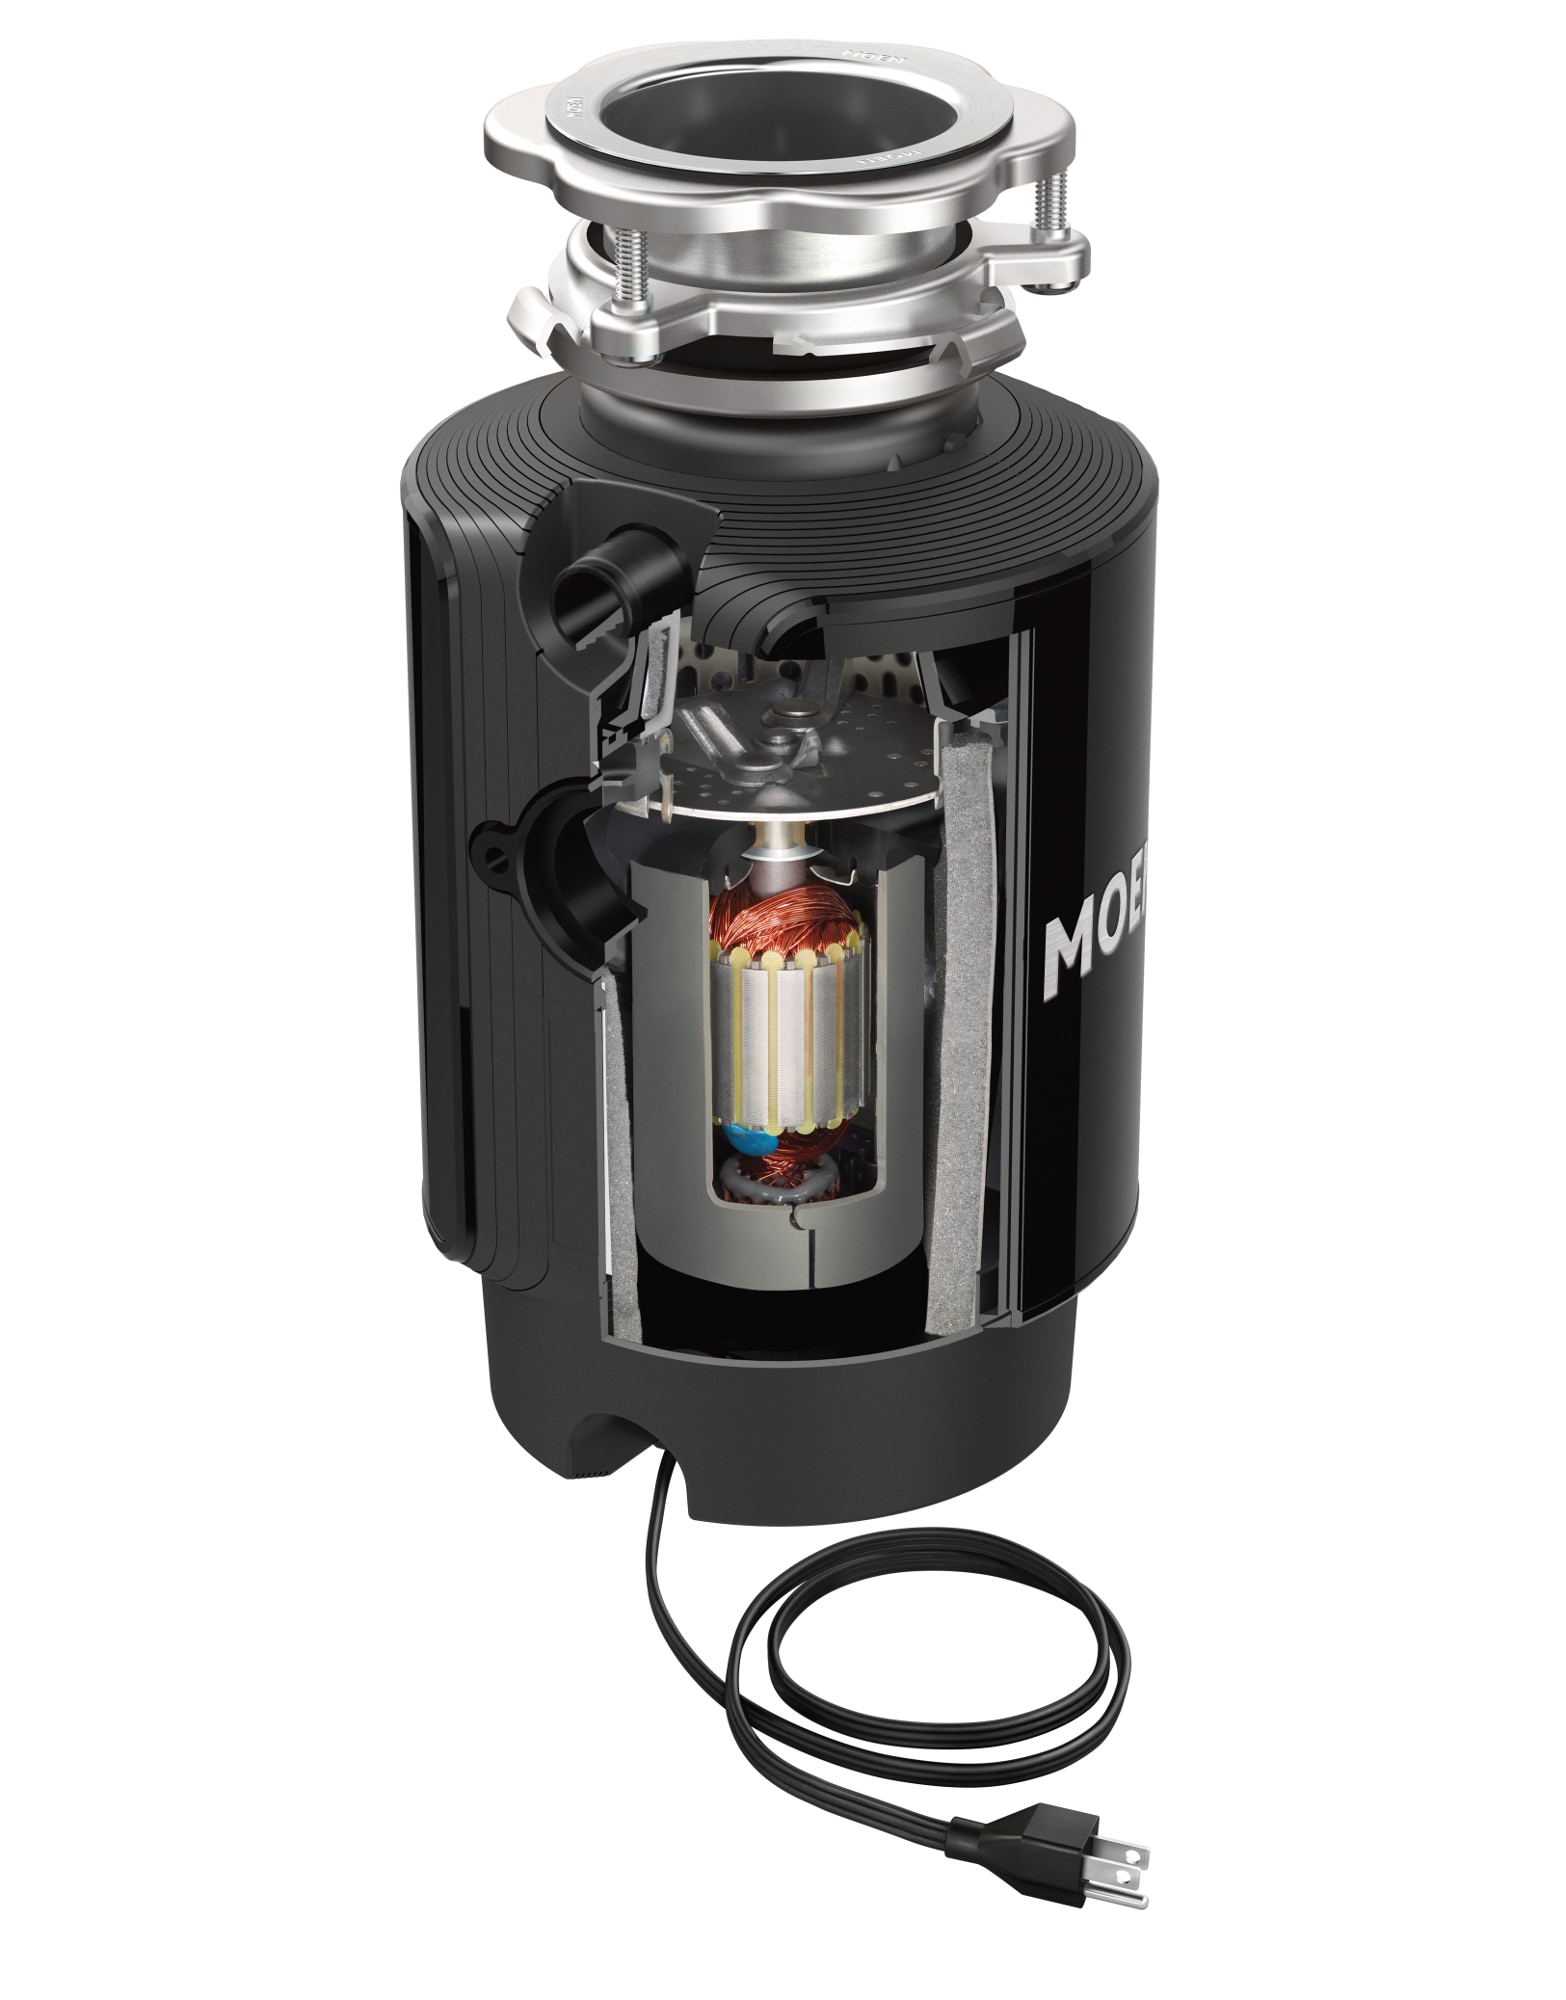 Moen GX75C Host Series 3/4 Horsepower Continuous Feed Compact Garbage  Disposal, Power Cord Included Black キッチン